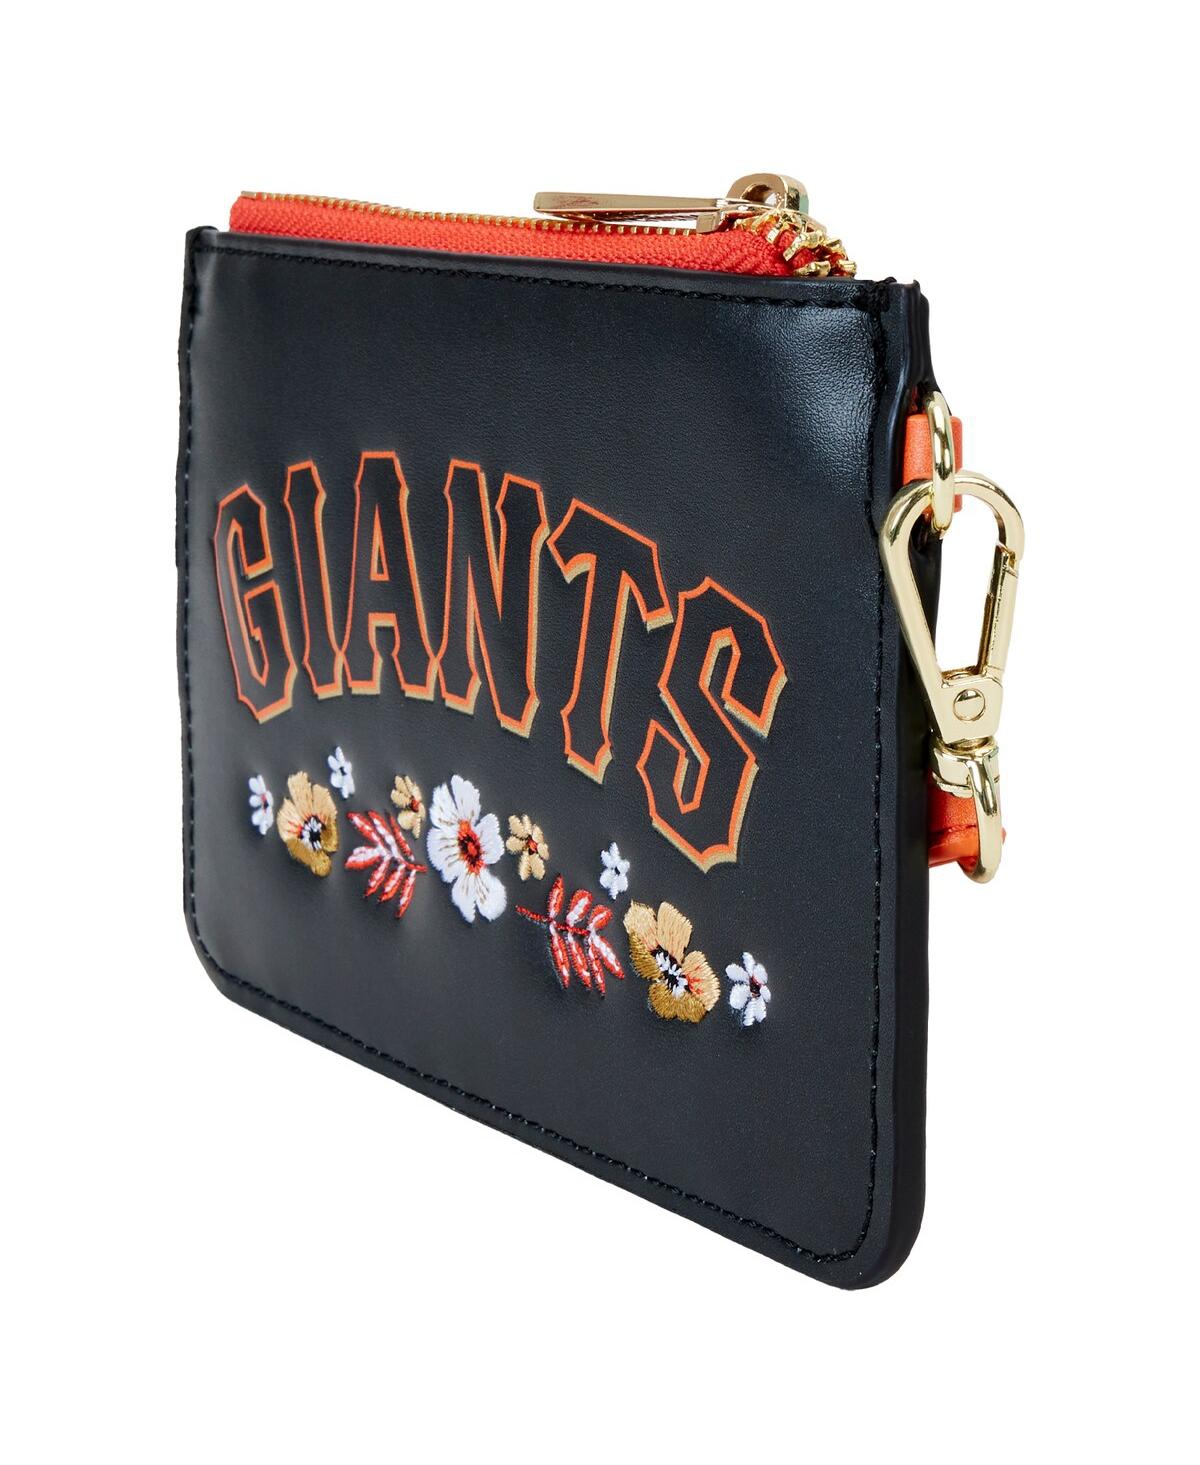 Shop Loungefly San Francisco Giants Floral Wrist Clutch In No Color